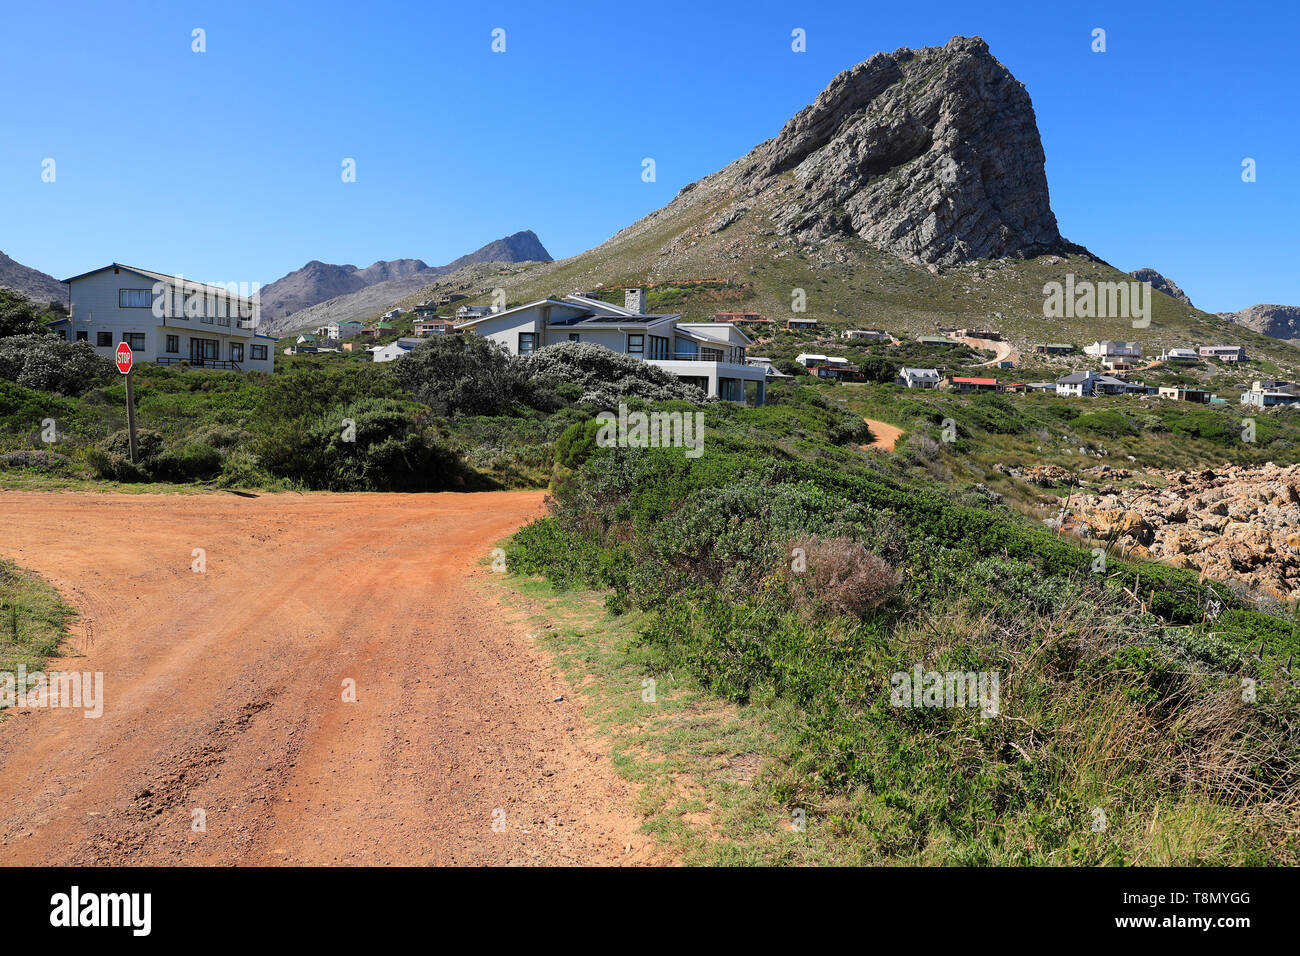 Klein-Hangklip mountain in Rooi-Els, Western Cape Province, South Africa. Stock Photo